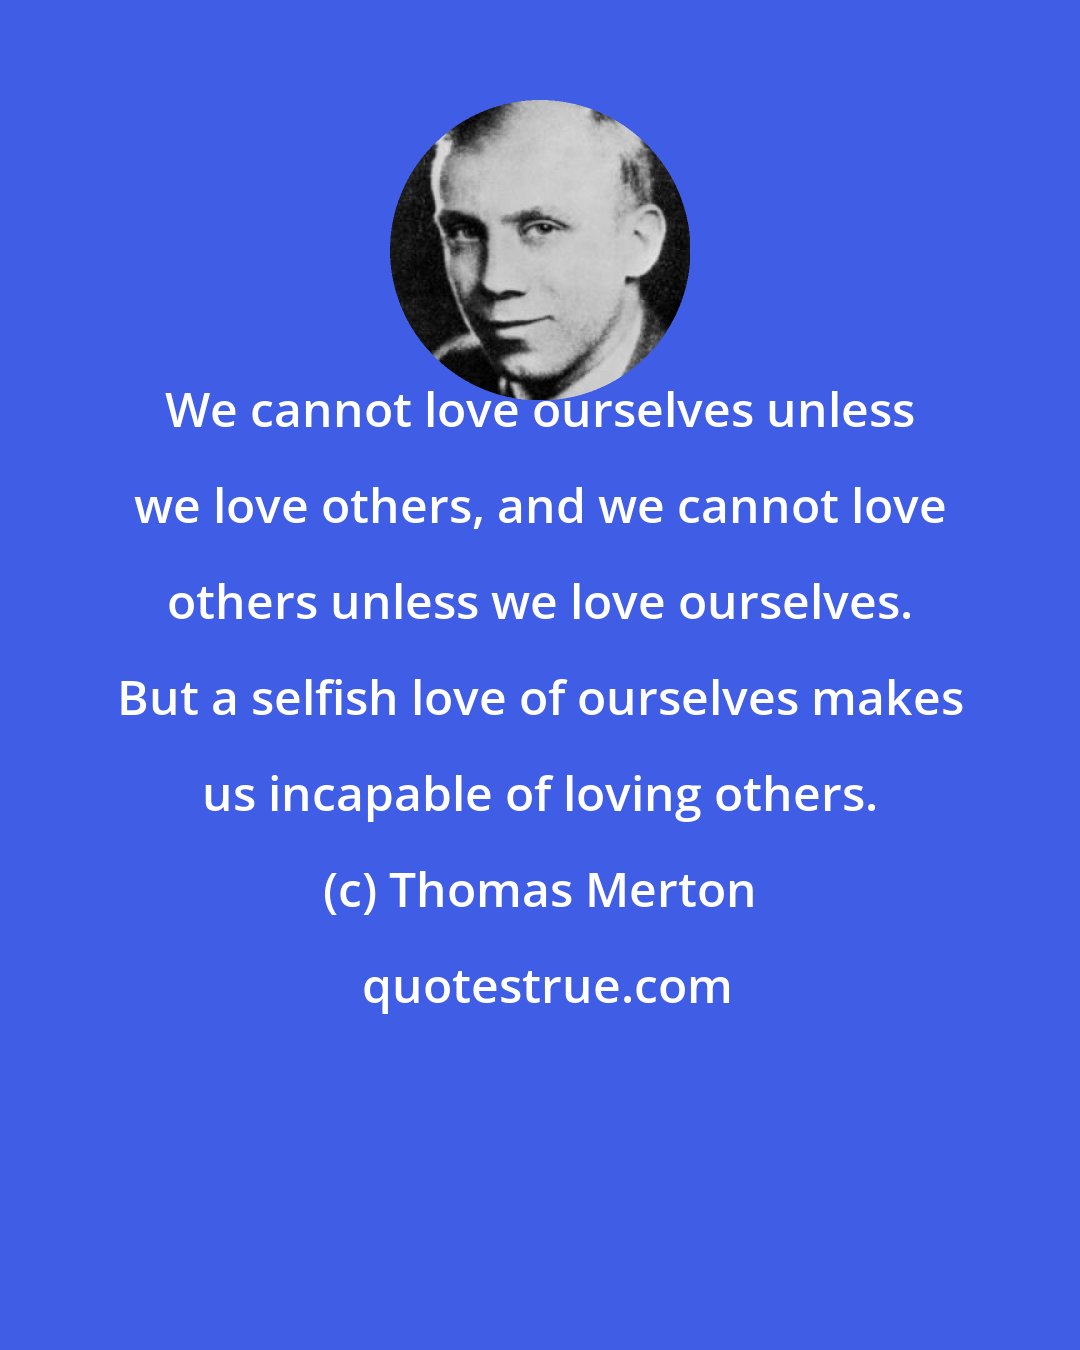 Thomas Merton: We cannot love ourselves unless we love others, and we cannot love others unless we love ourselves. But a selfish love of ourselves makes us incapable of loving others.